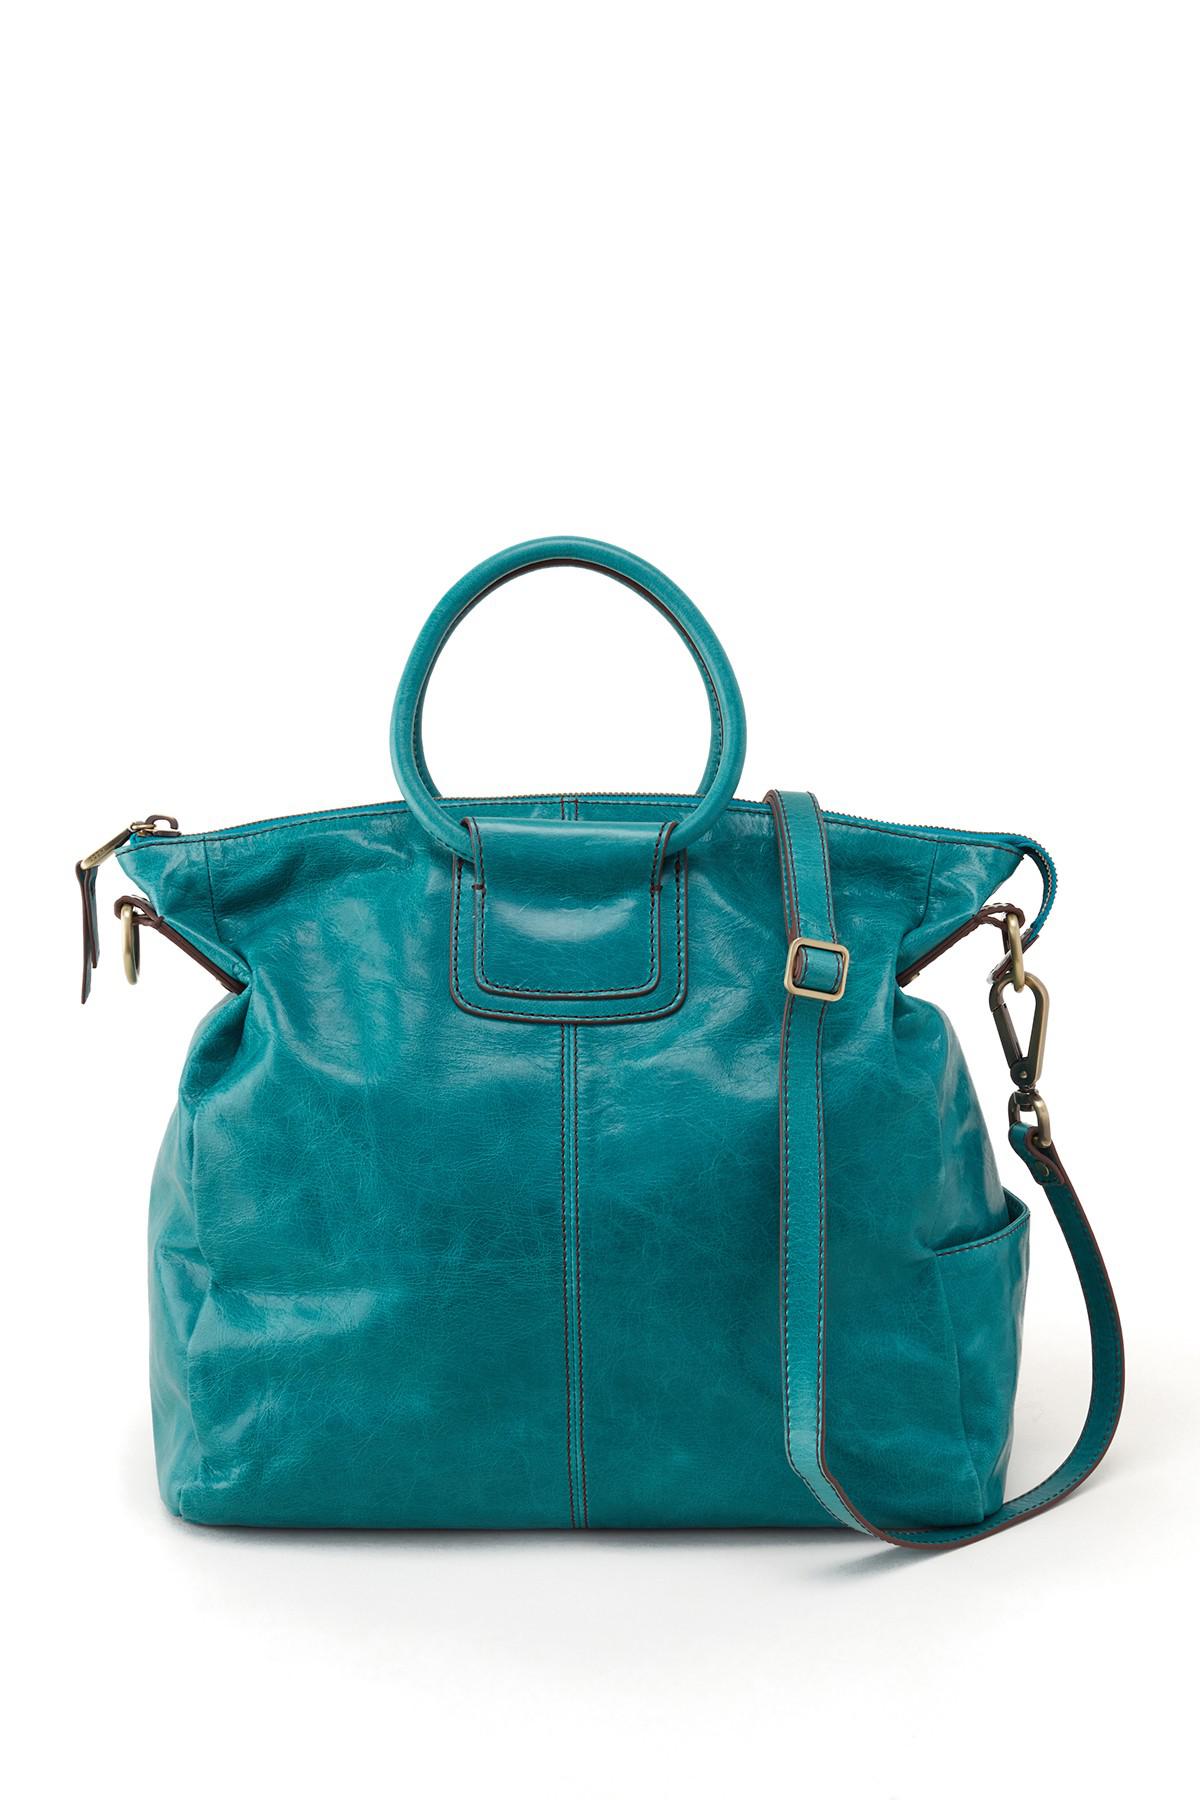 Hobo Sheila Covertible Leather Shoulder Bag in Teal Green (Green) - Lyst